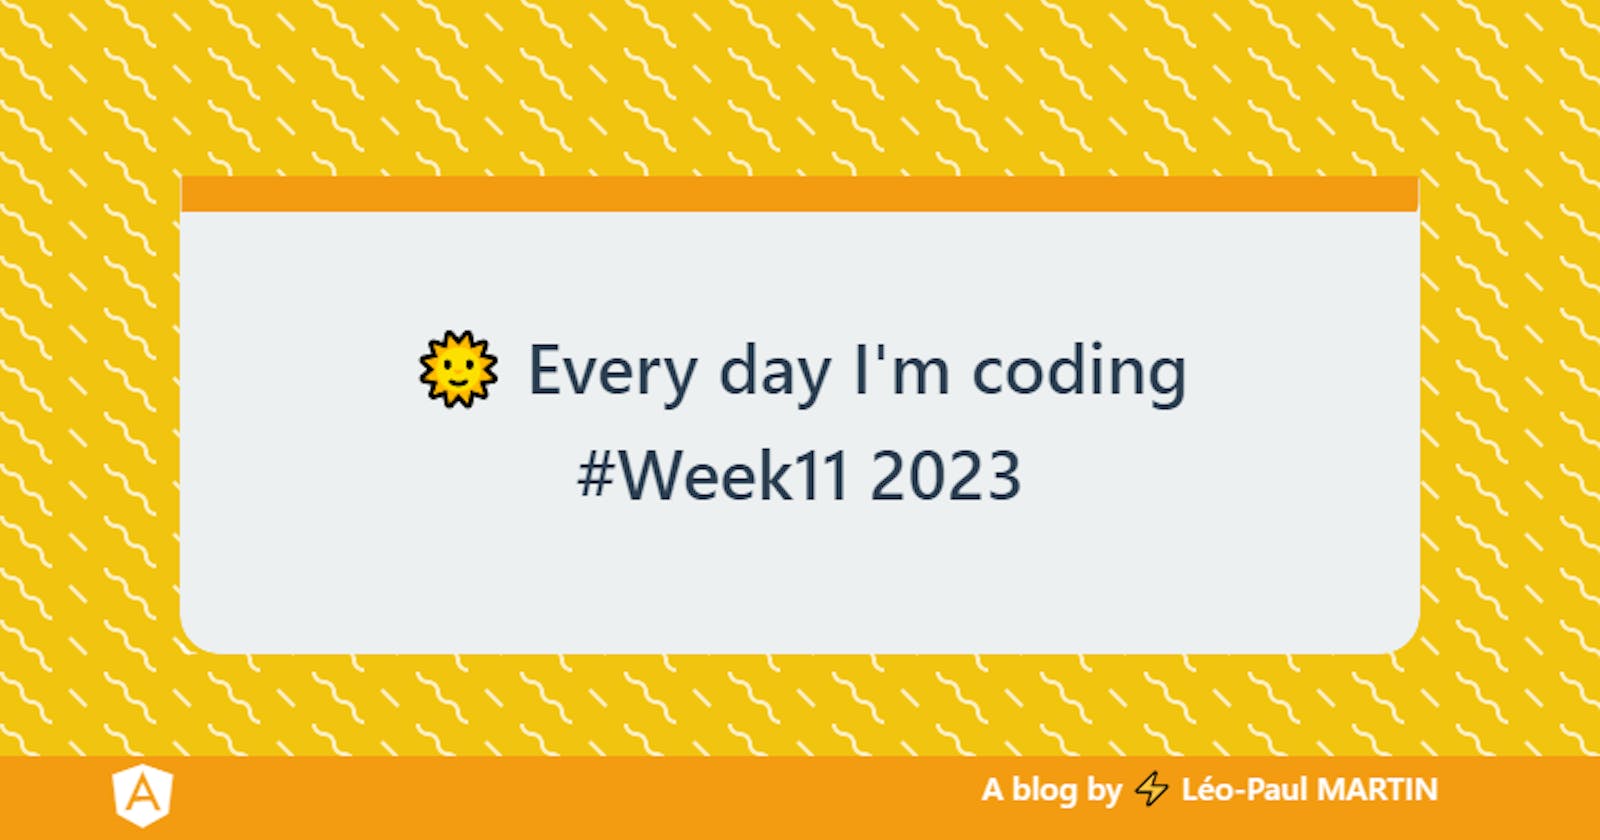 🌞 Every day I'm coding #Week11 2023